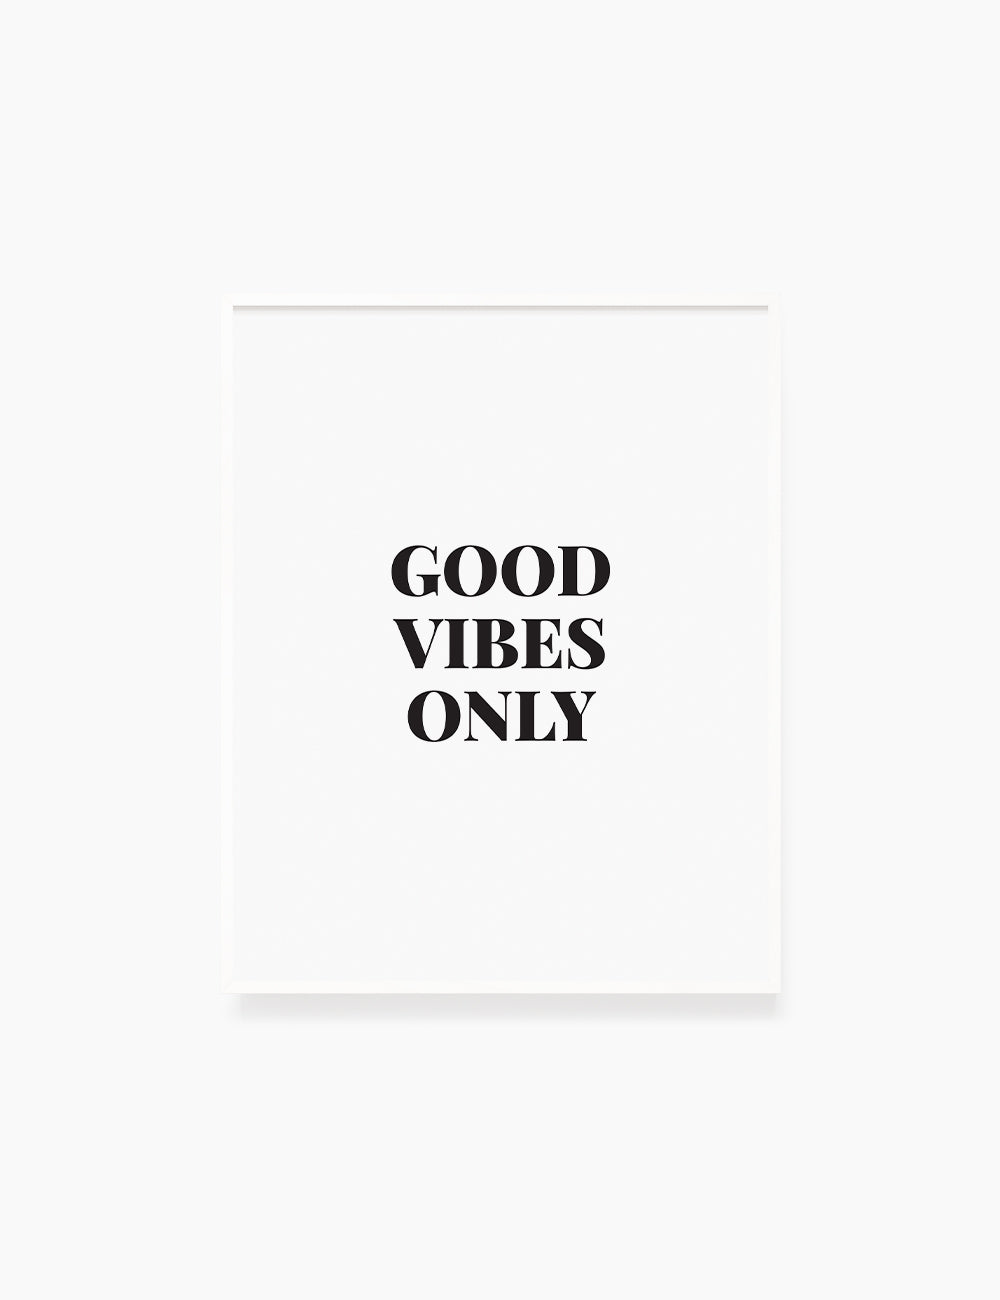 Printable Wall Art Quote: GOOD VIBES ONLY Printable Poster. Inspirational Quote. Motivational Quote. WA021 - Paper Moon Art & Design